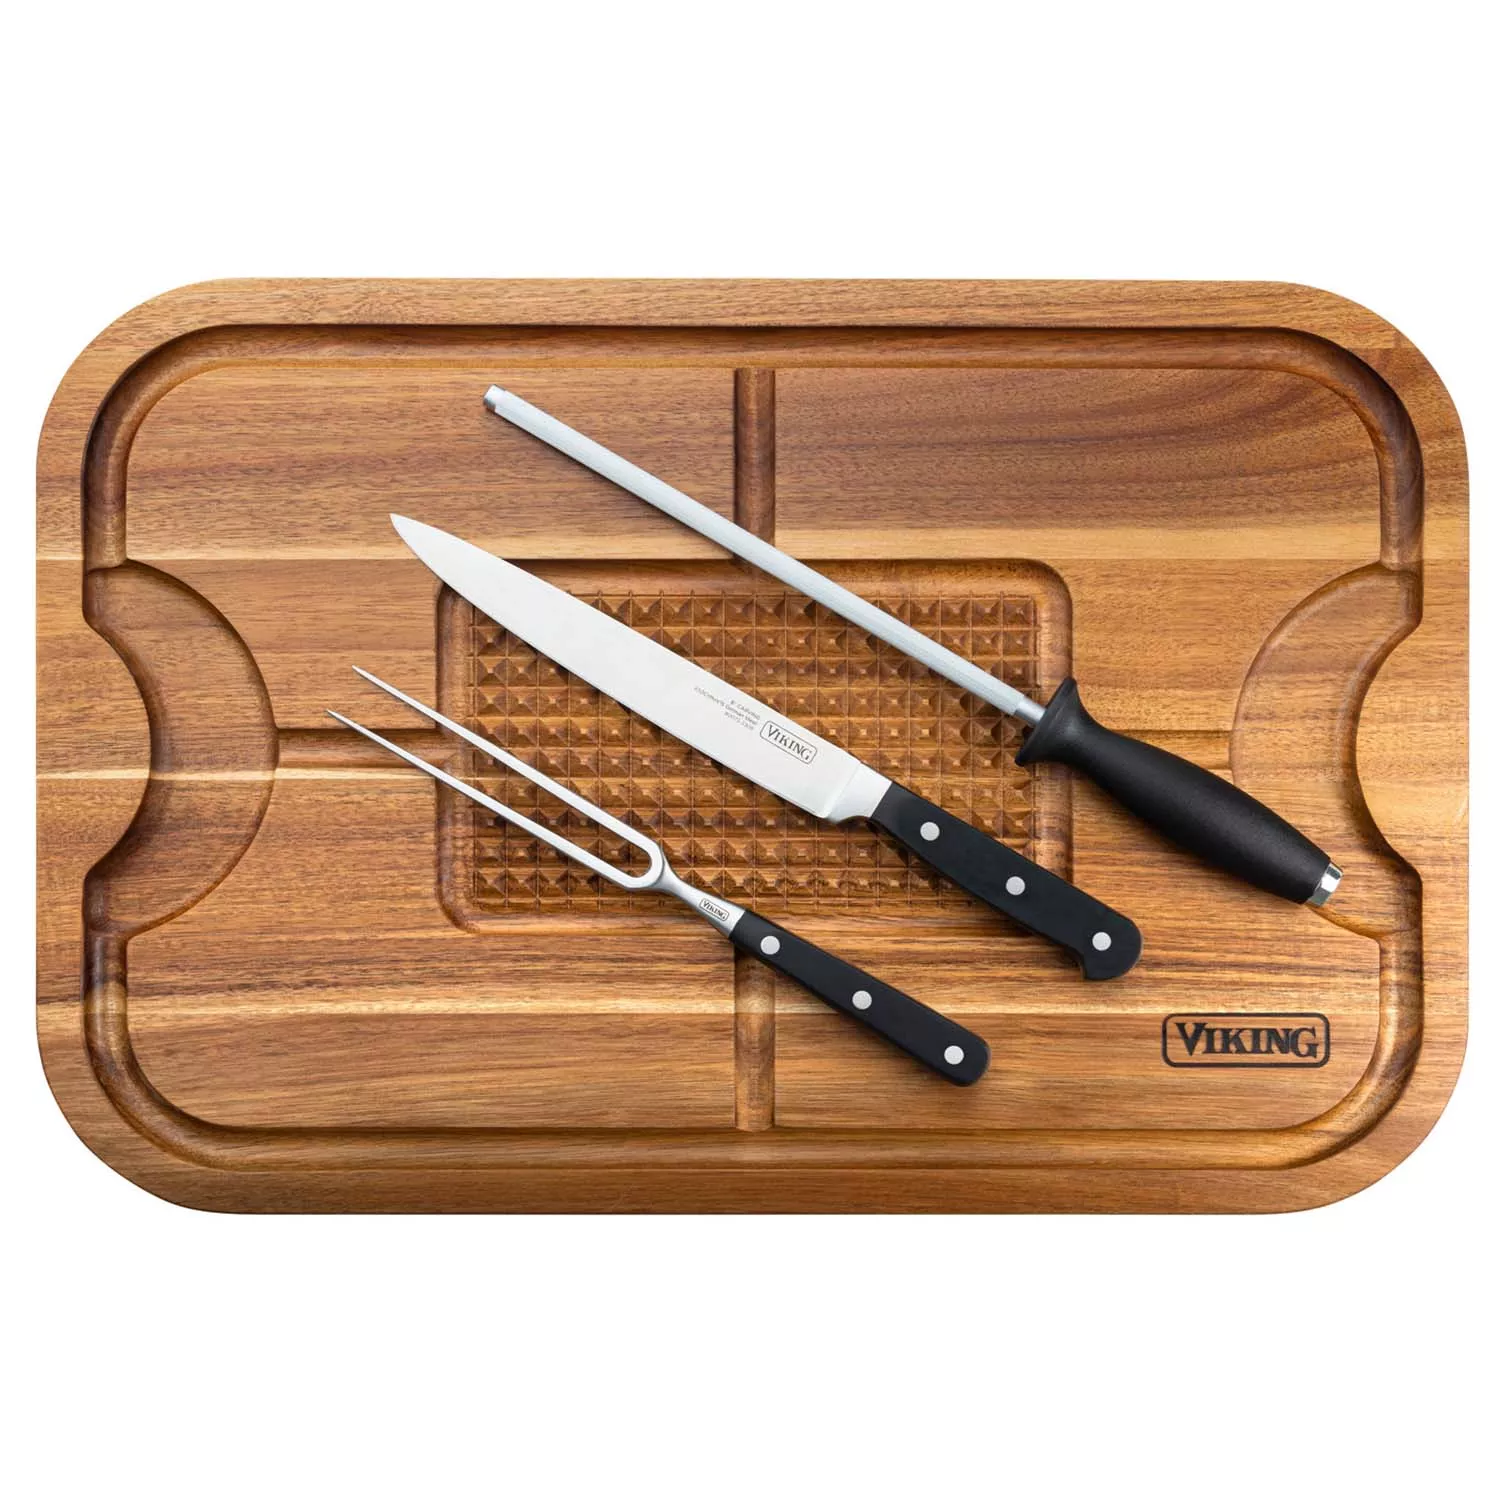 Photos - Other Accessories VIKING XL Acacia Carving Board with 3-Piece Carving Set 40475-9984 